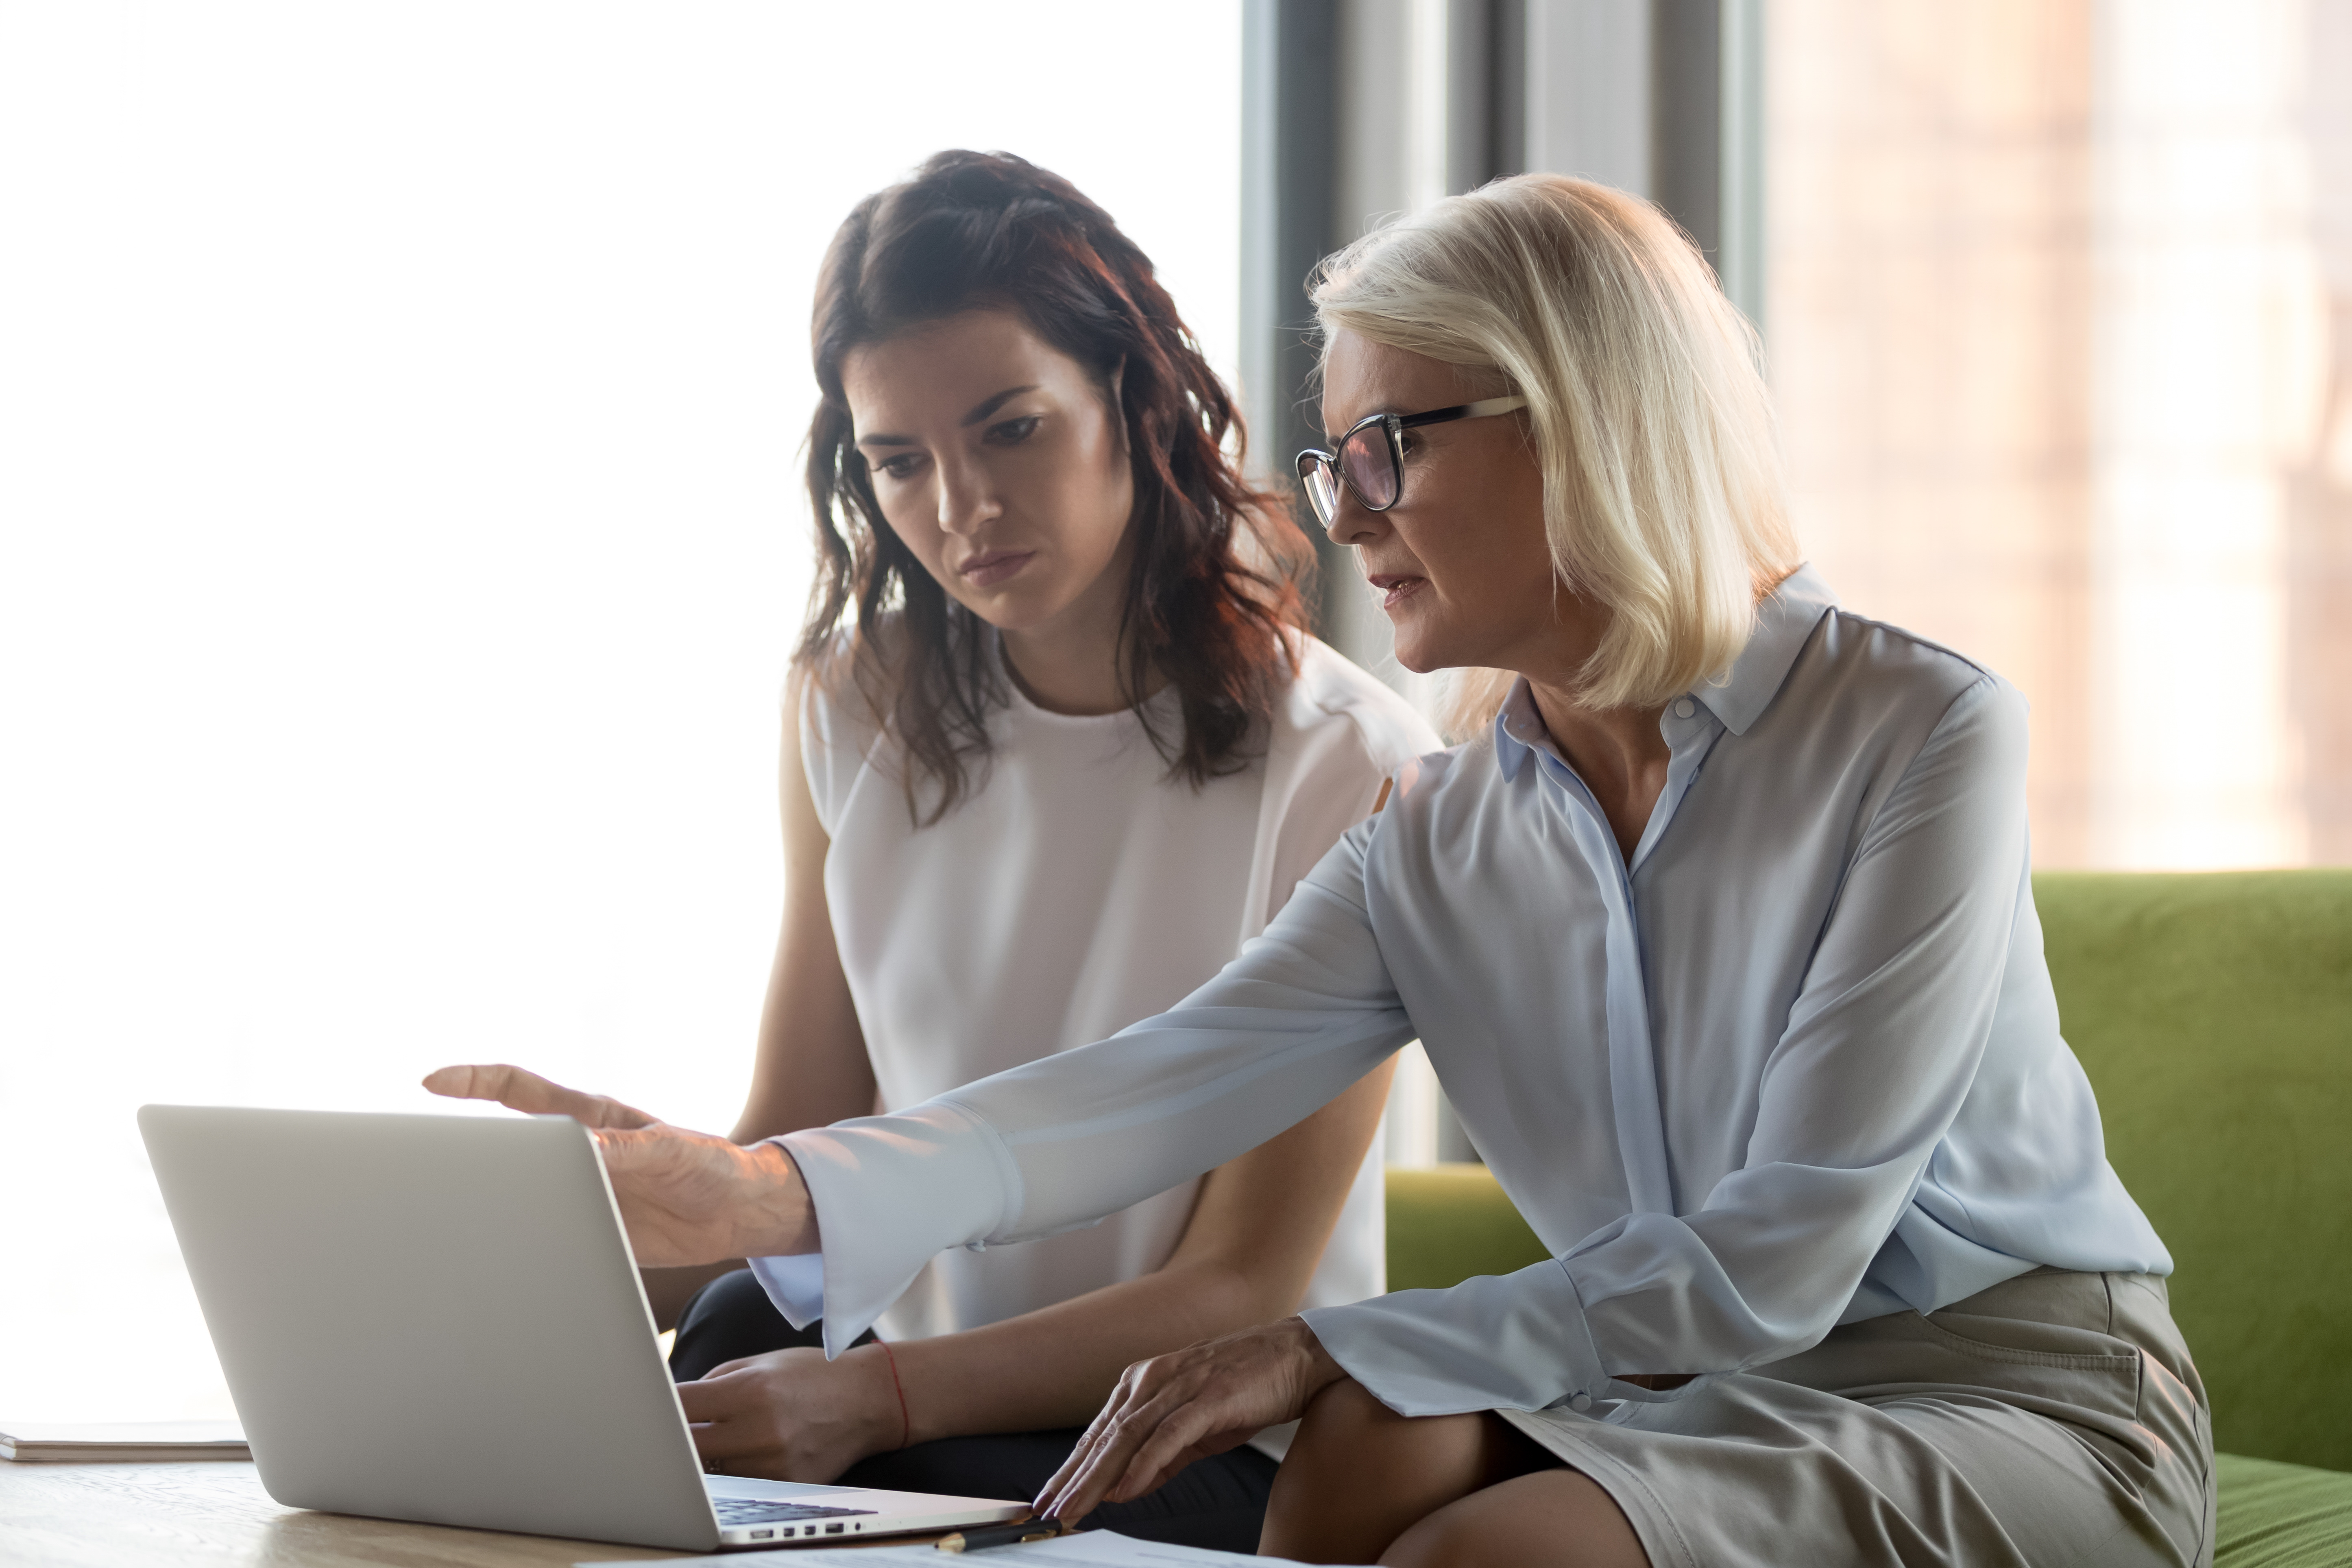 Middle aged woman mentoring young woman (Adobe stock image)